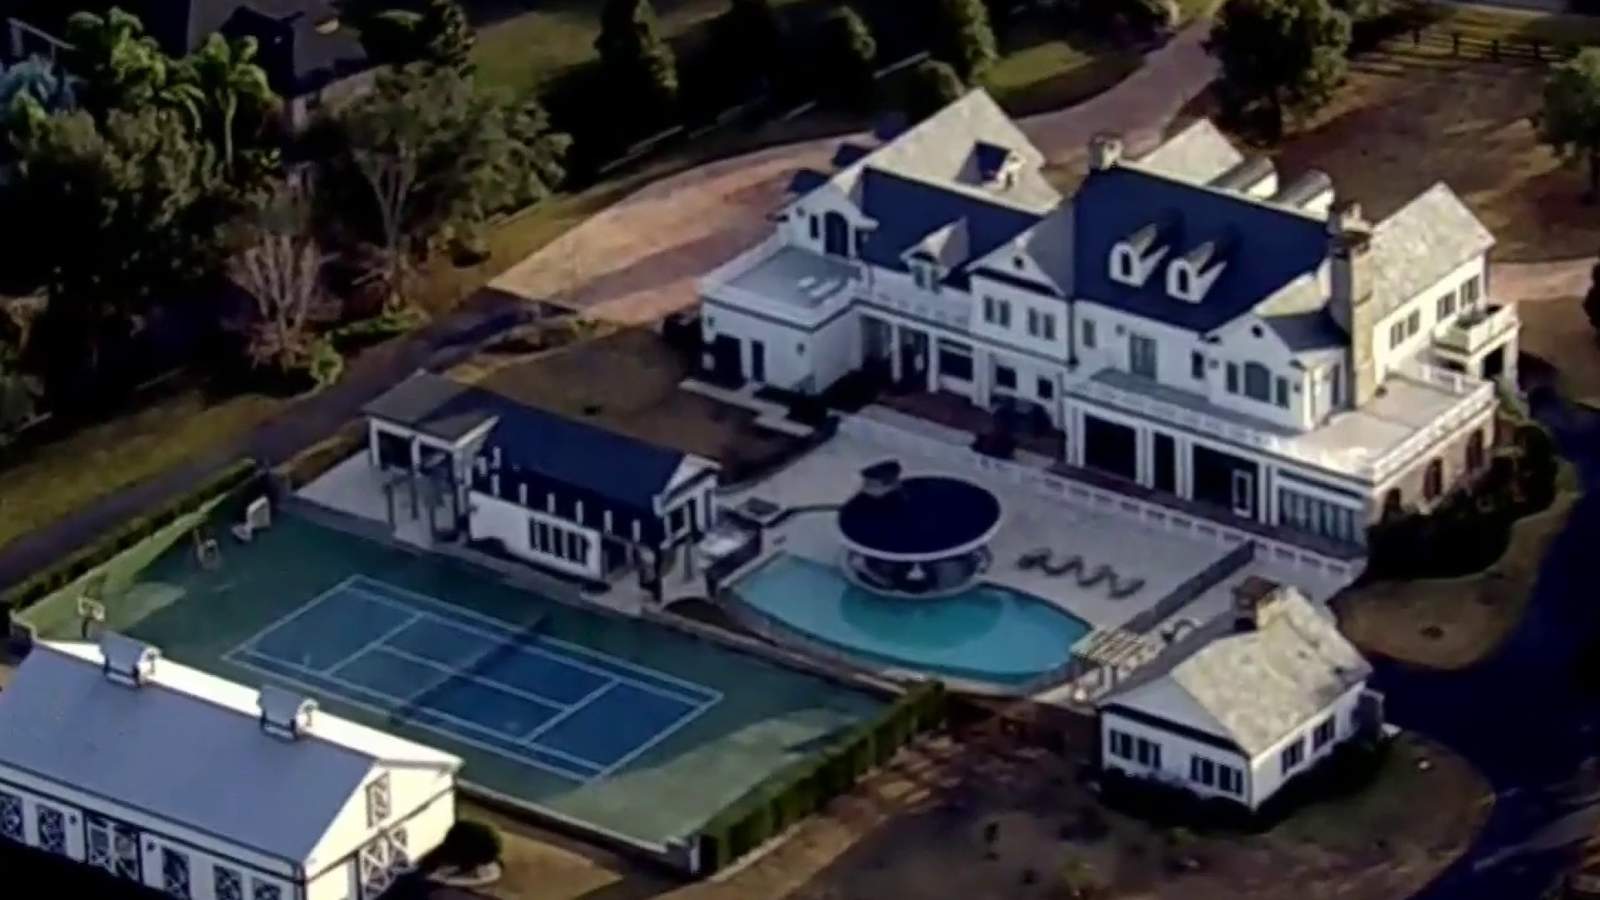 Feds: Man uses $7.2M from PPP funds to buy Seminole County mansion, luxury cars